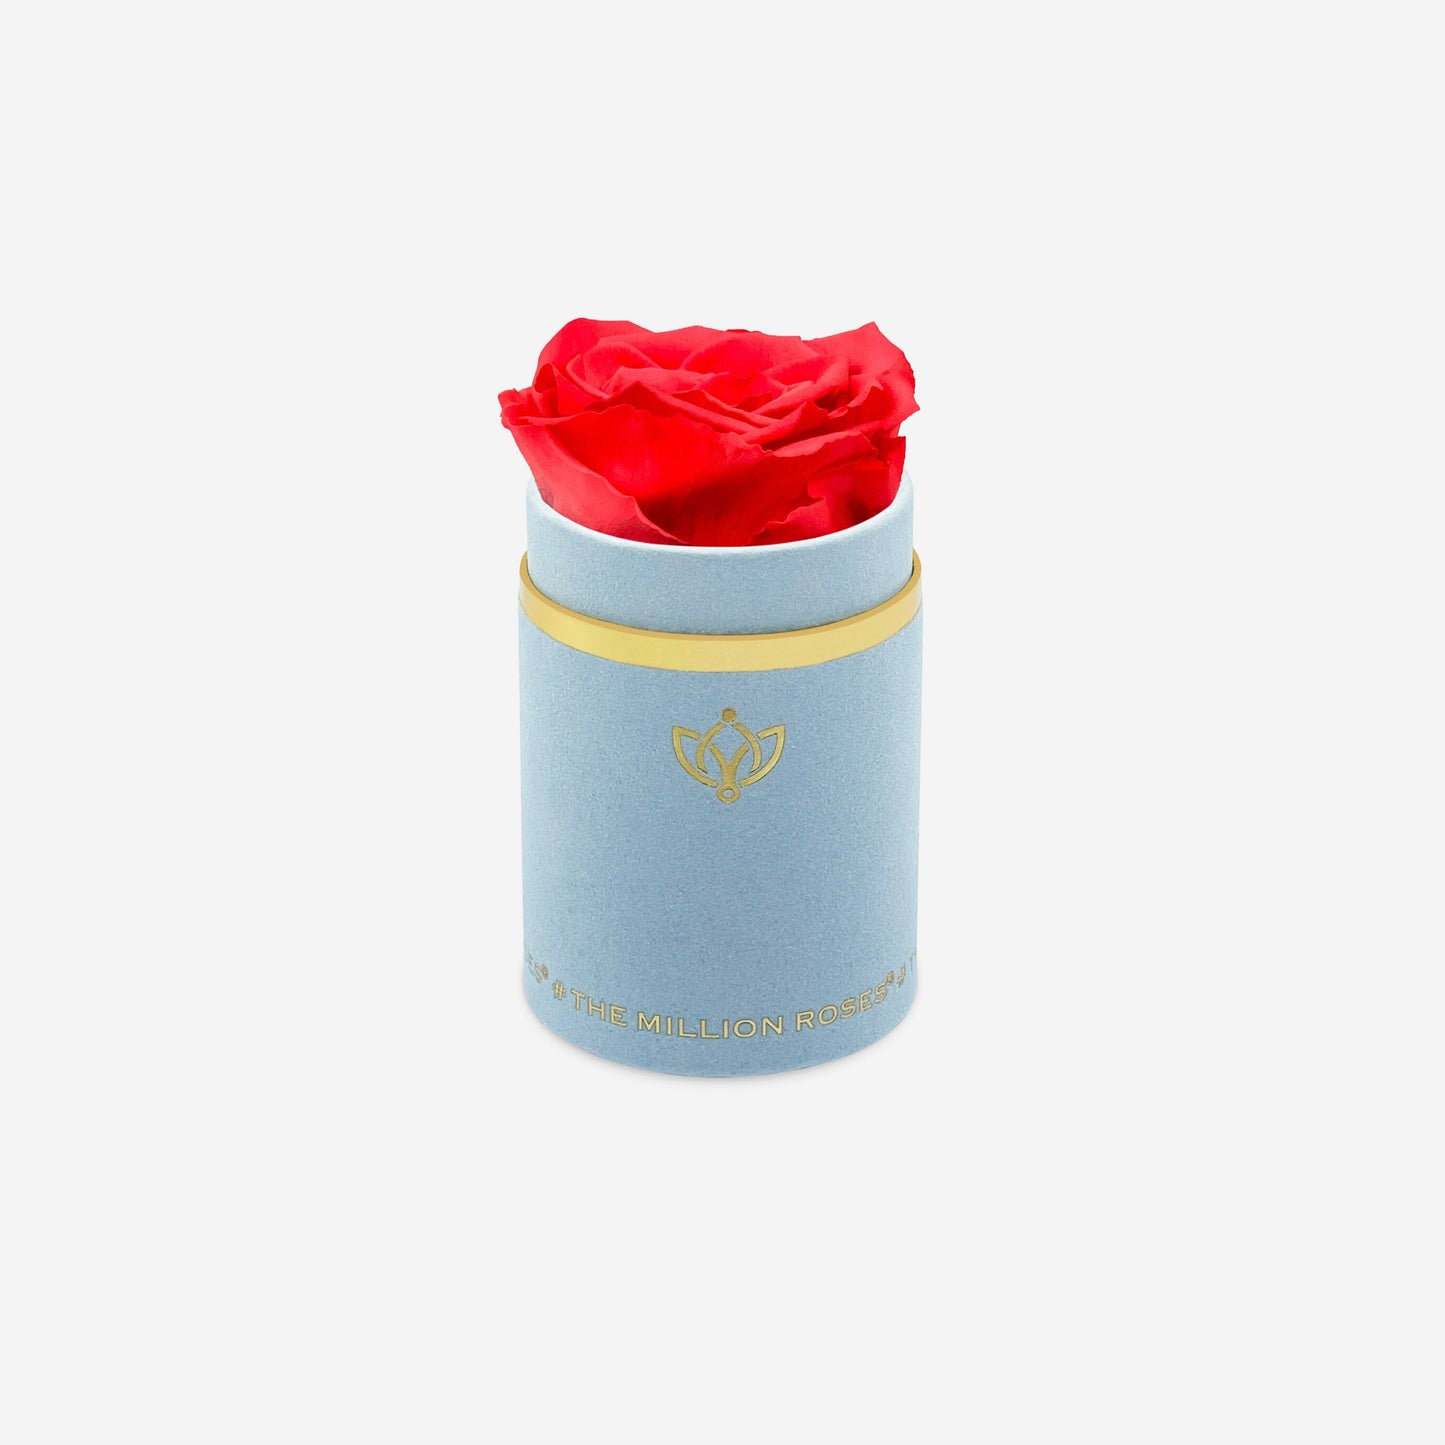 Single Light Blue Suede Box | Coral Rose - The Million Roses